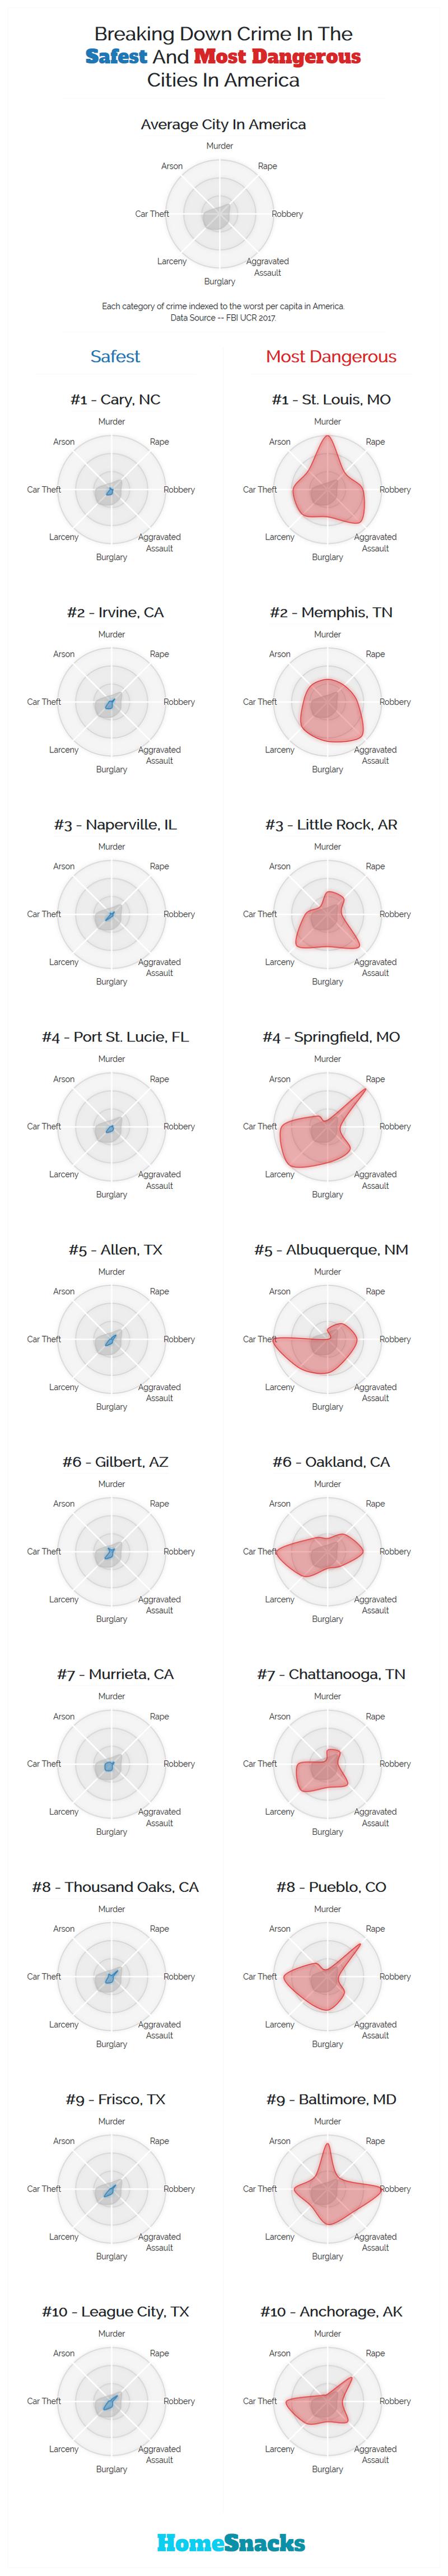 Breaking Down Crime In The Safest And Most Dangerous Cities In America